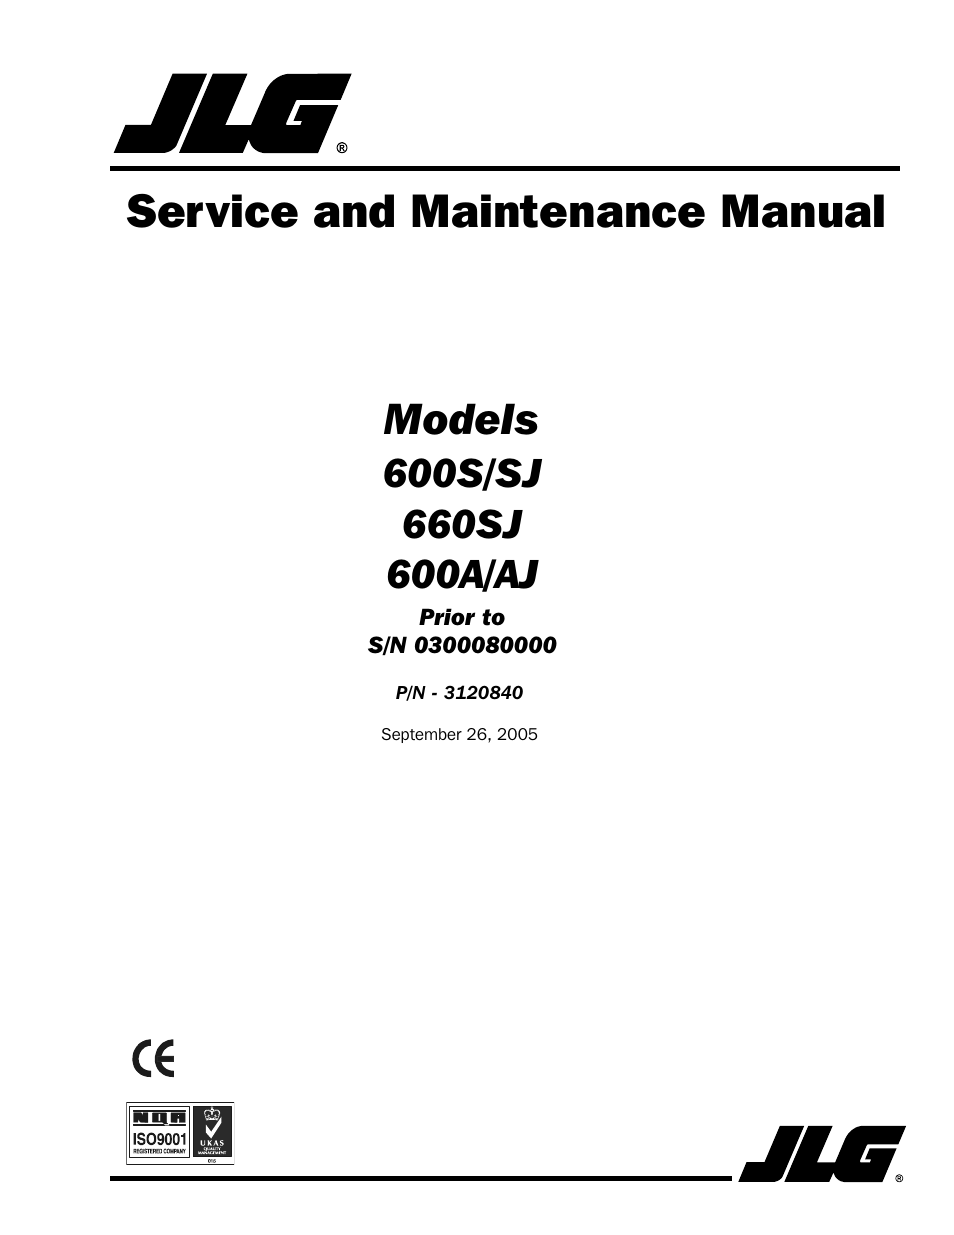 JLG 660SJ Service Manual User Manual | 272 pages | Also for: 600S_SJ